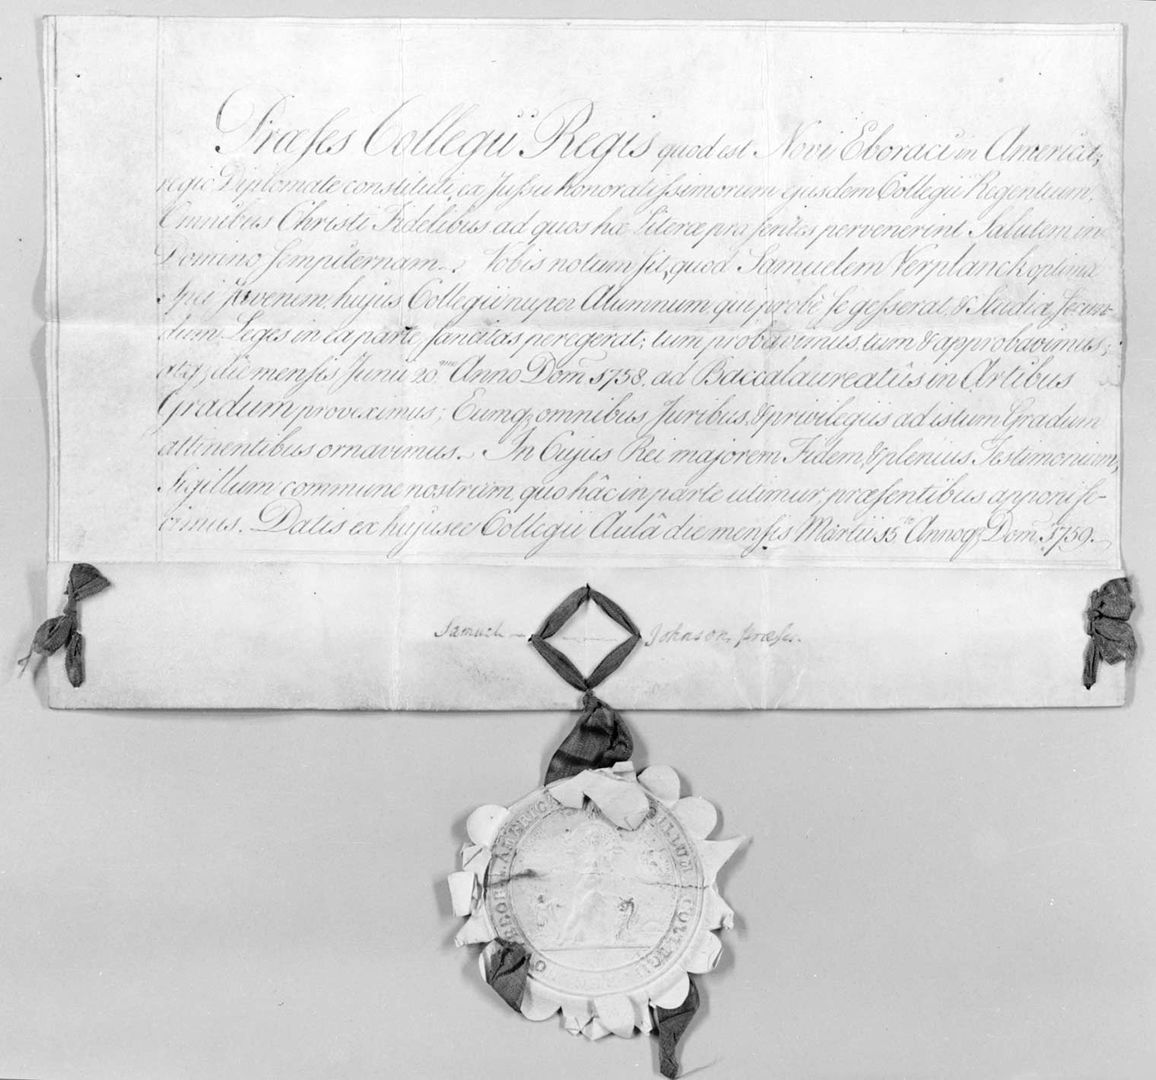 Samuel Verplanck's graduation diploma from King's College in 1759